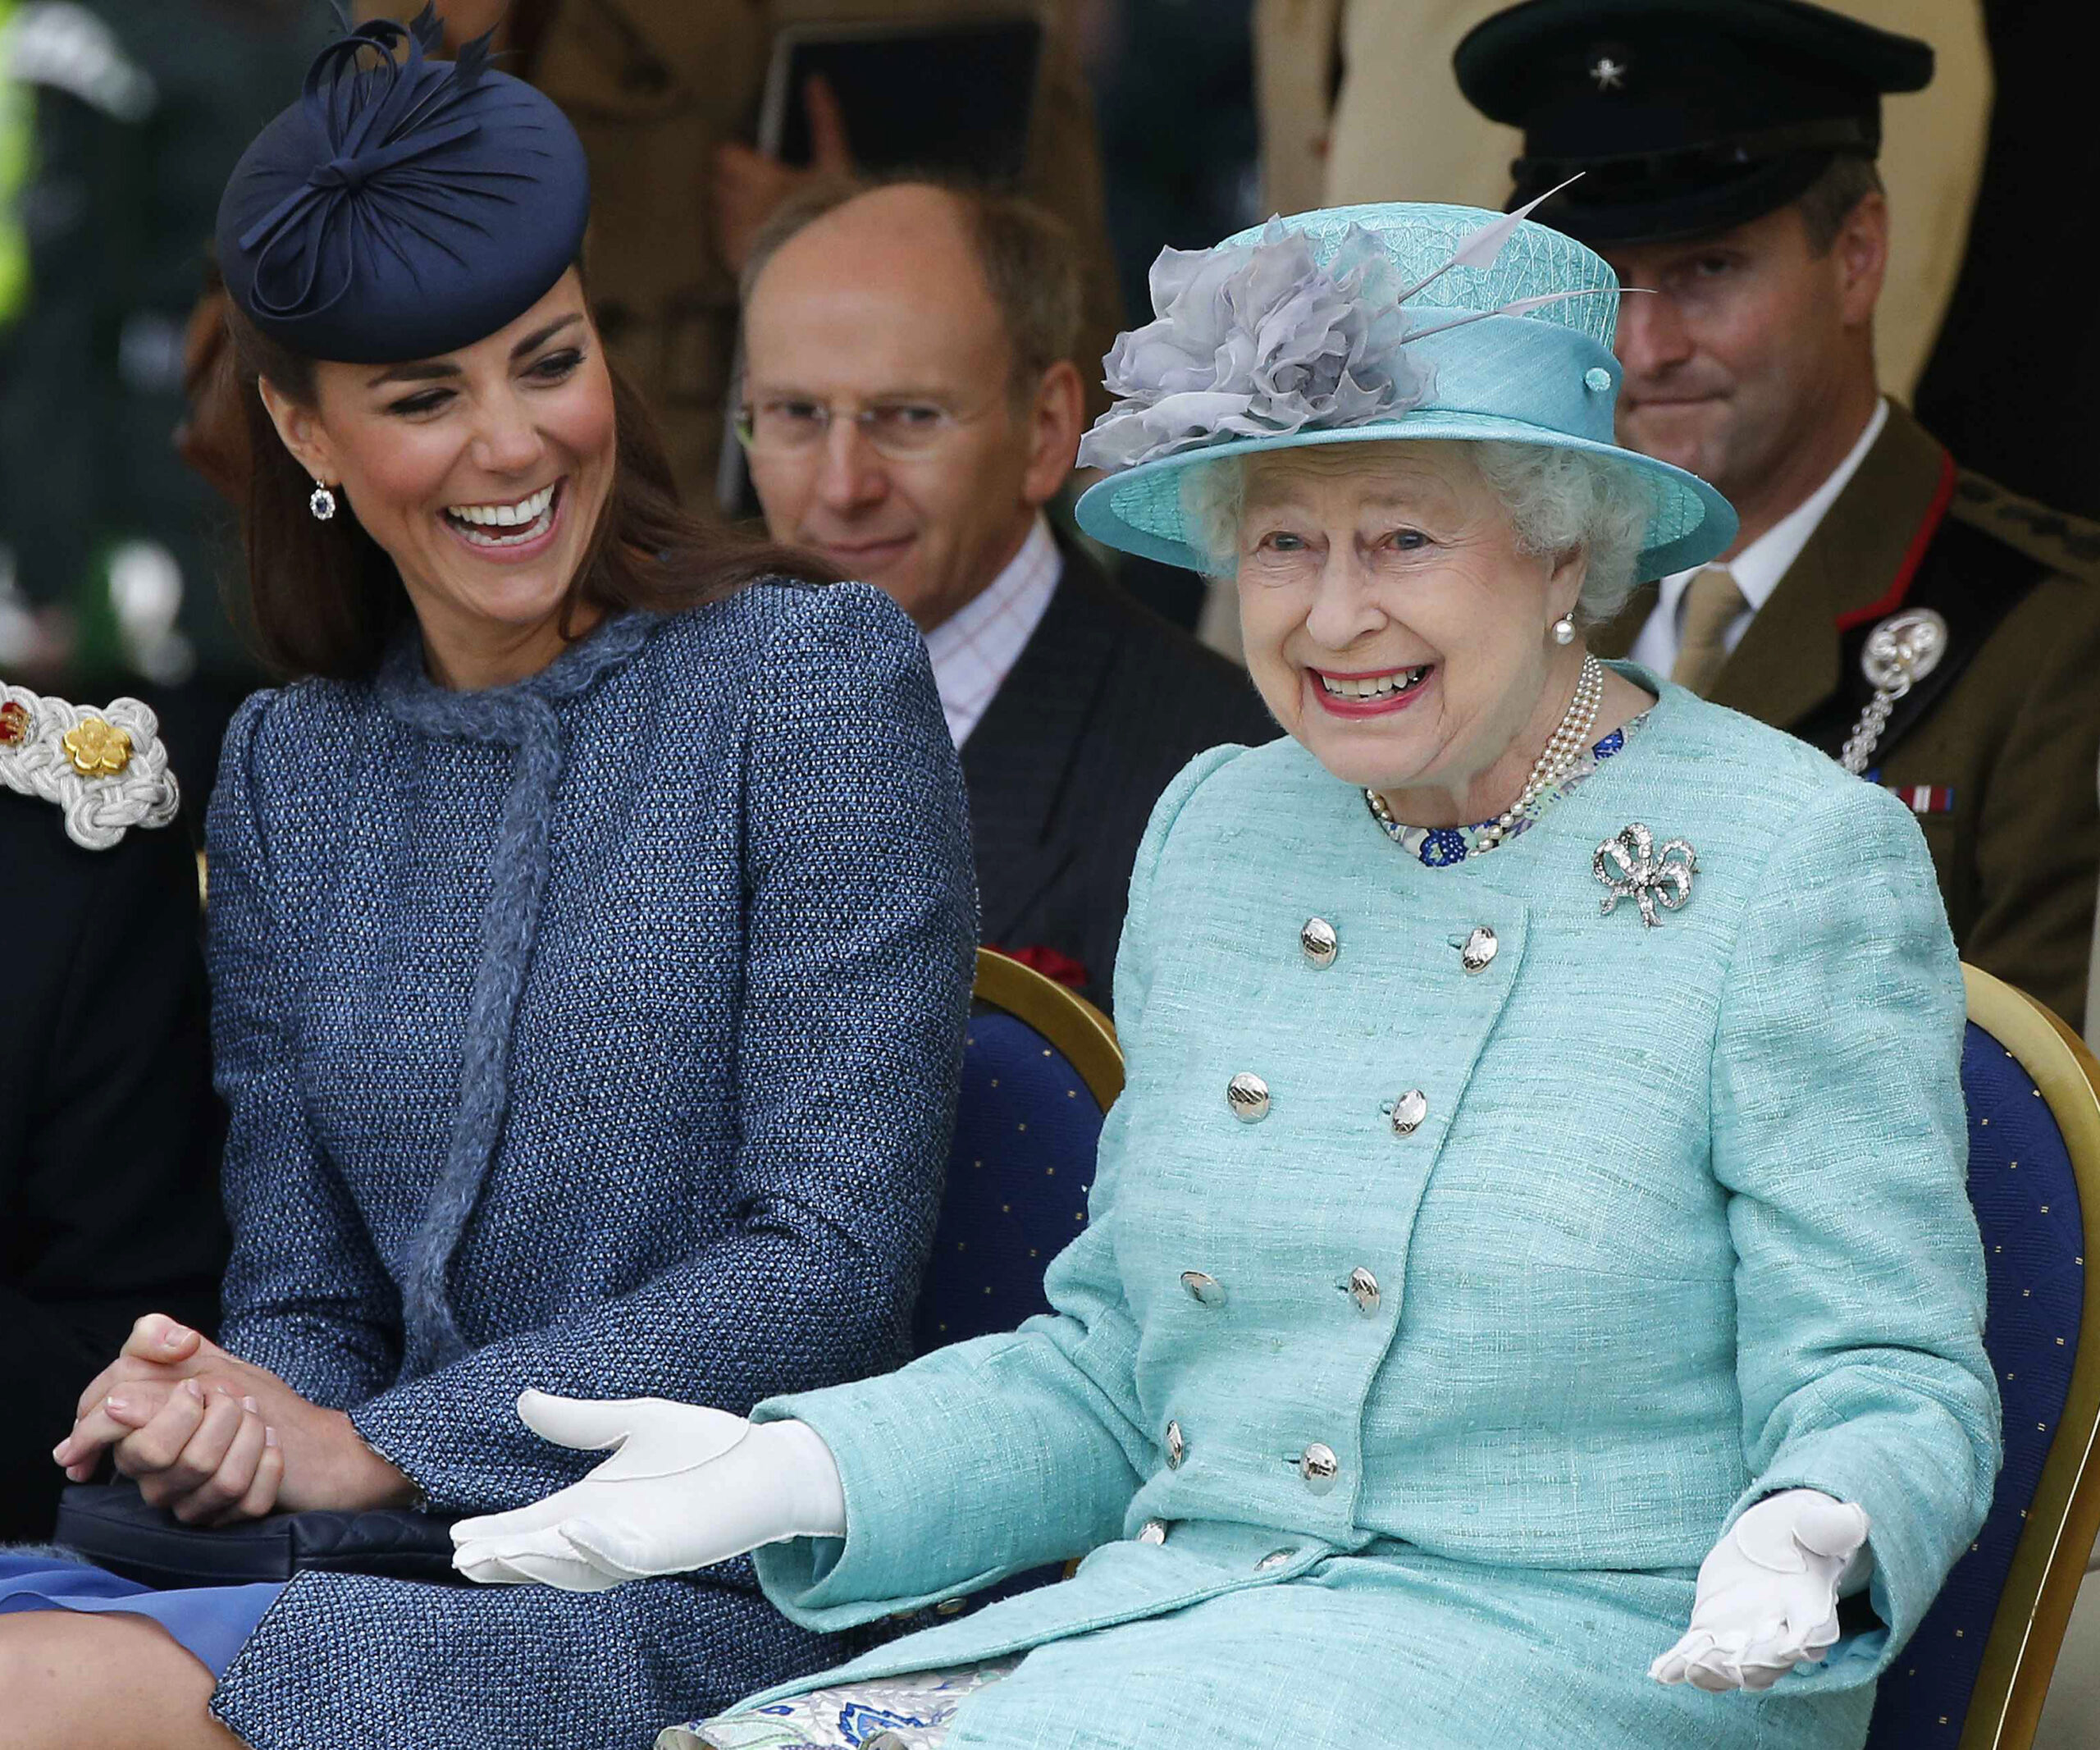 17 of the quirkiest royal family stories